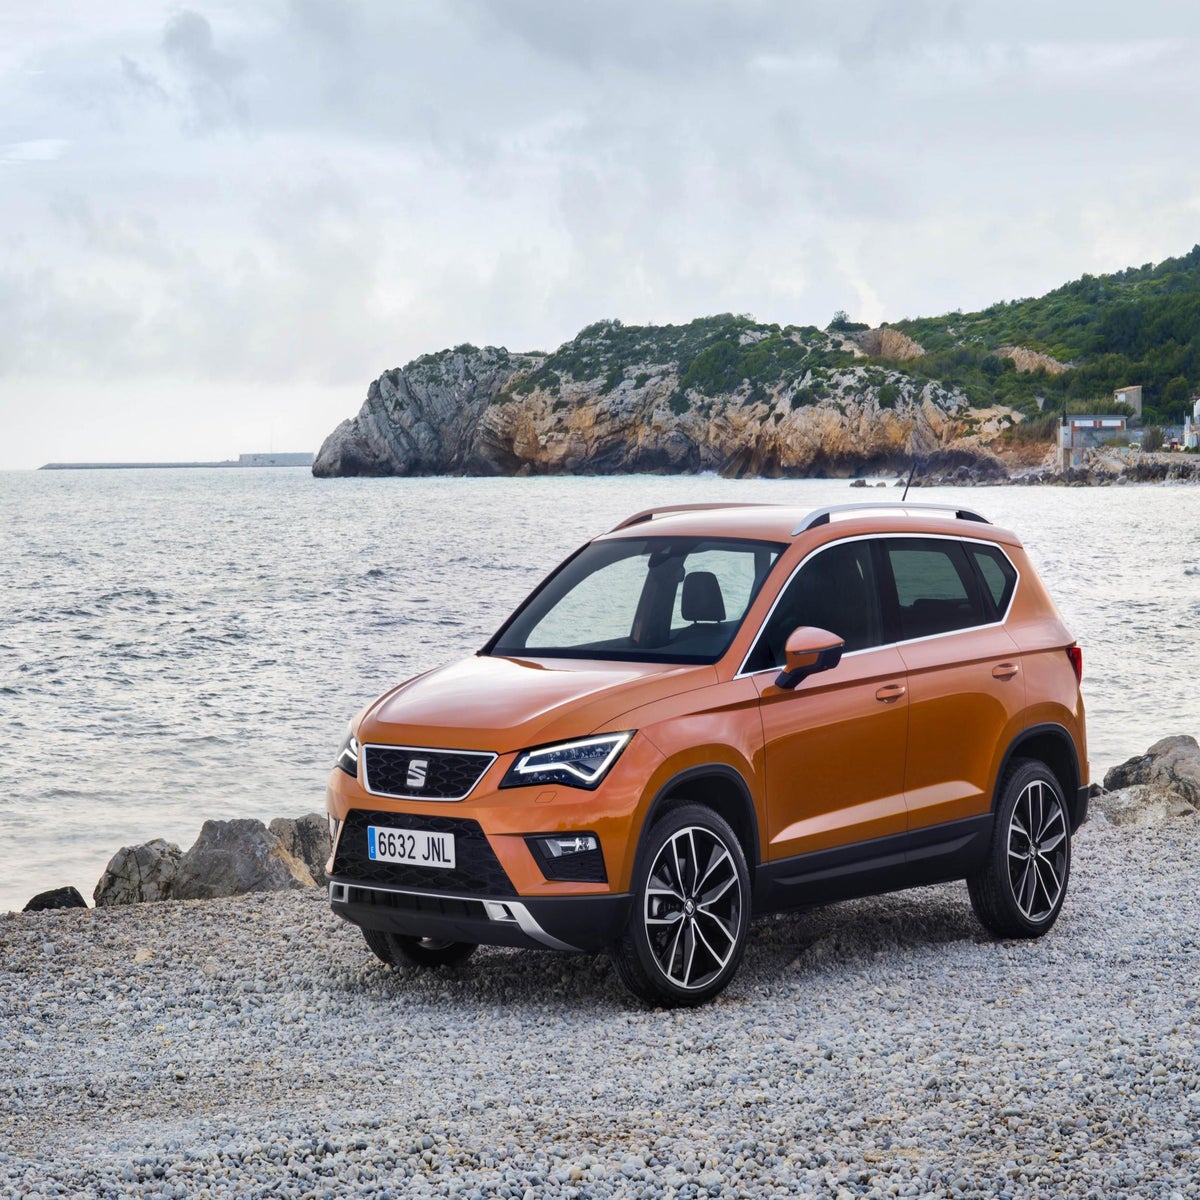 Seat Ateca: A good test drive and a bold colour will seal the deal